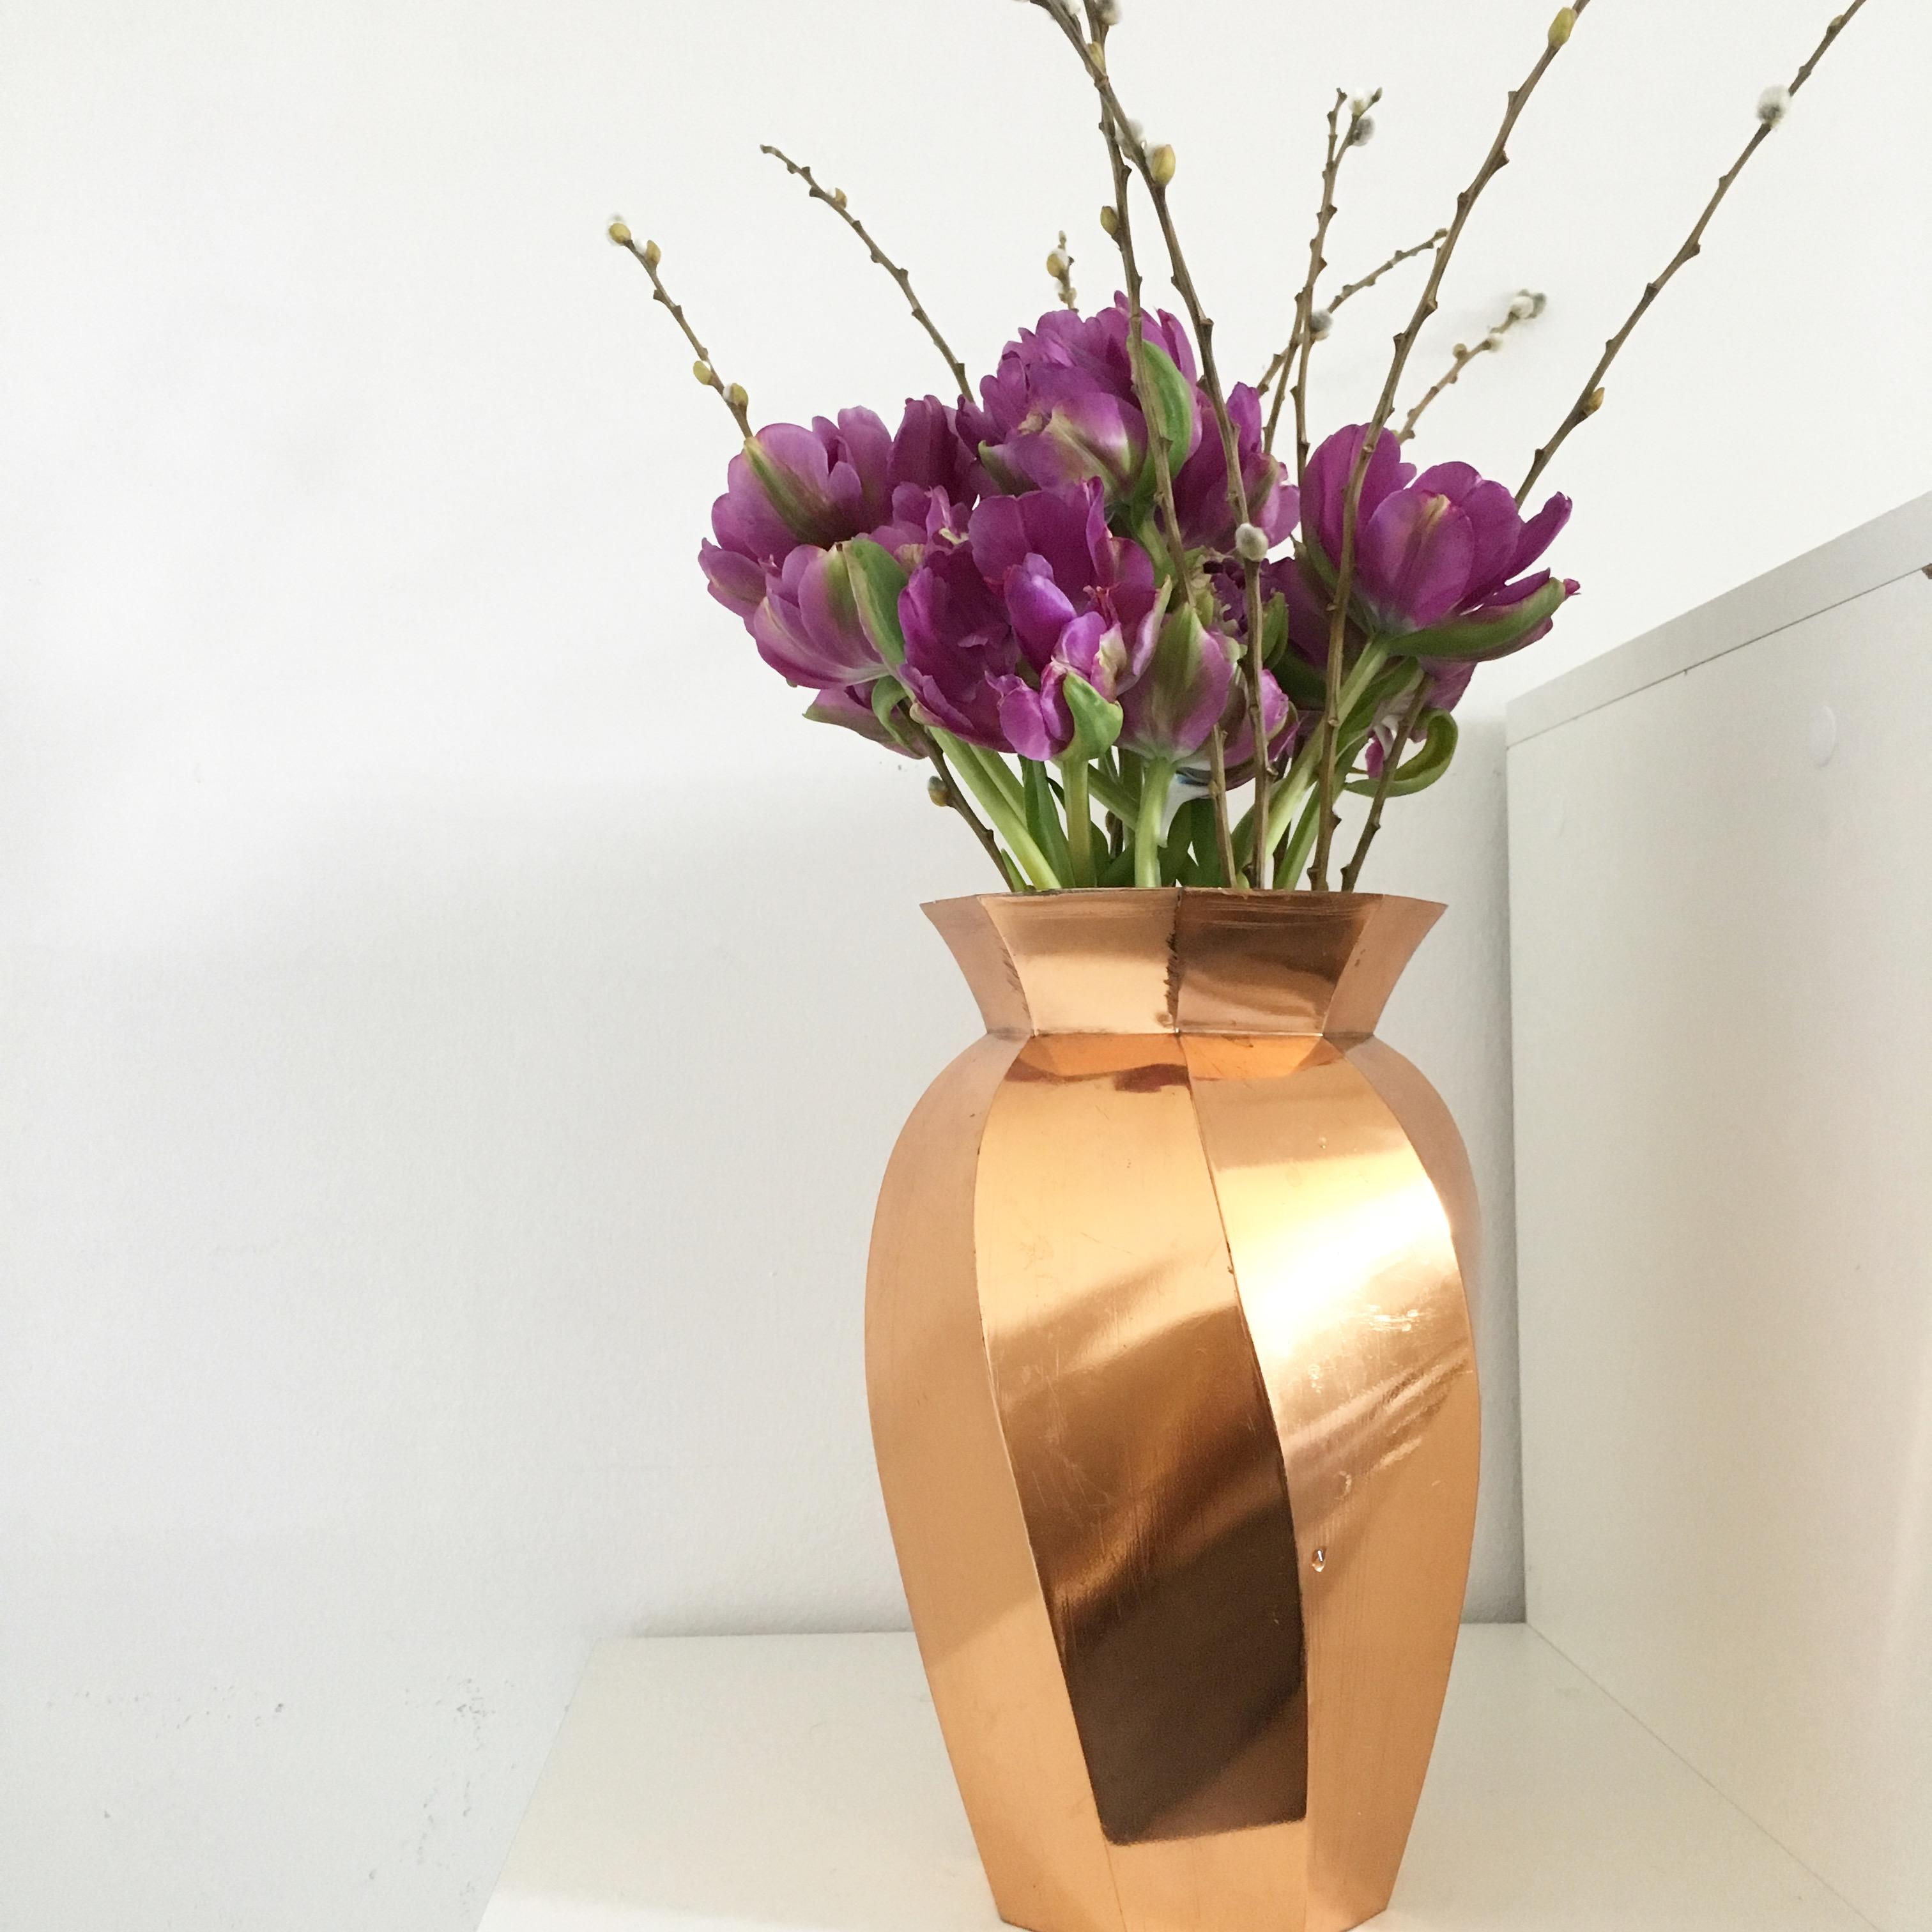 Color up your life.
#interior #flowers #masterpiece #copperlove